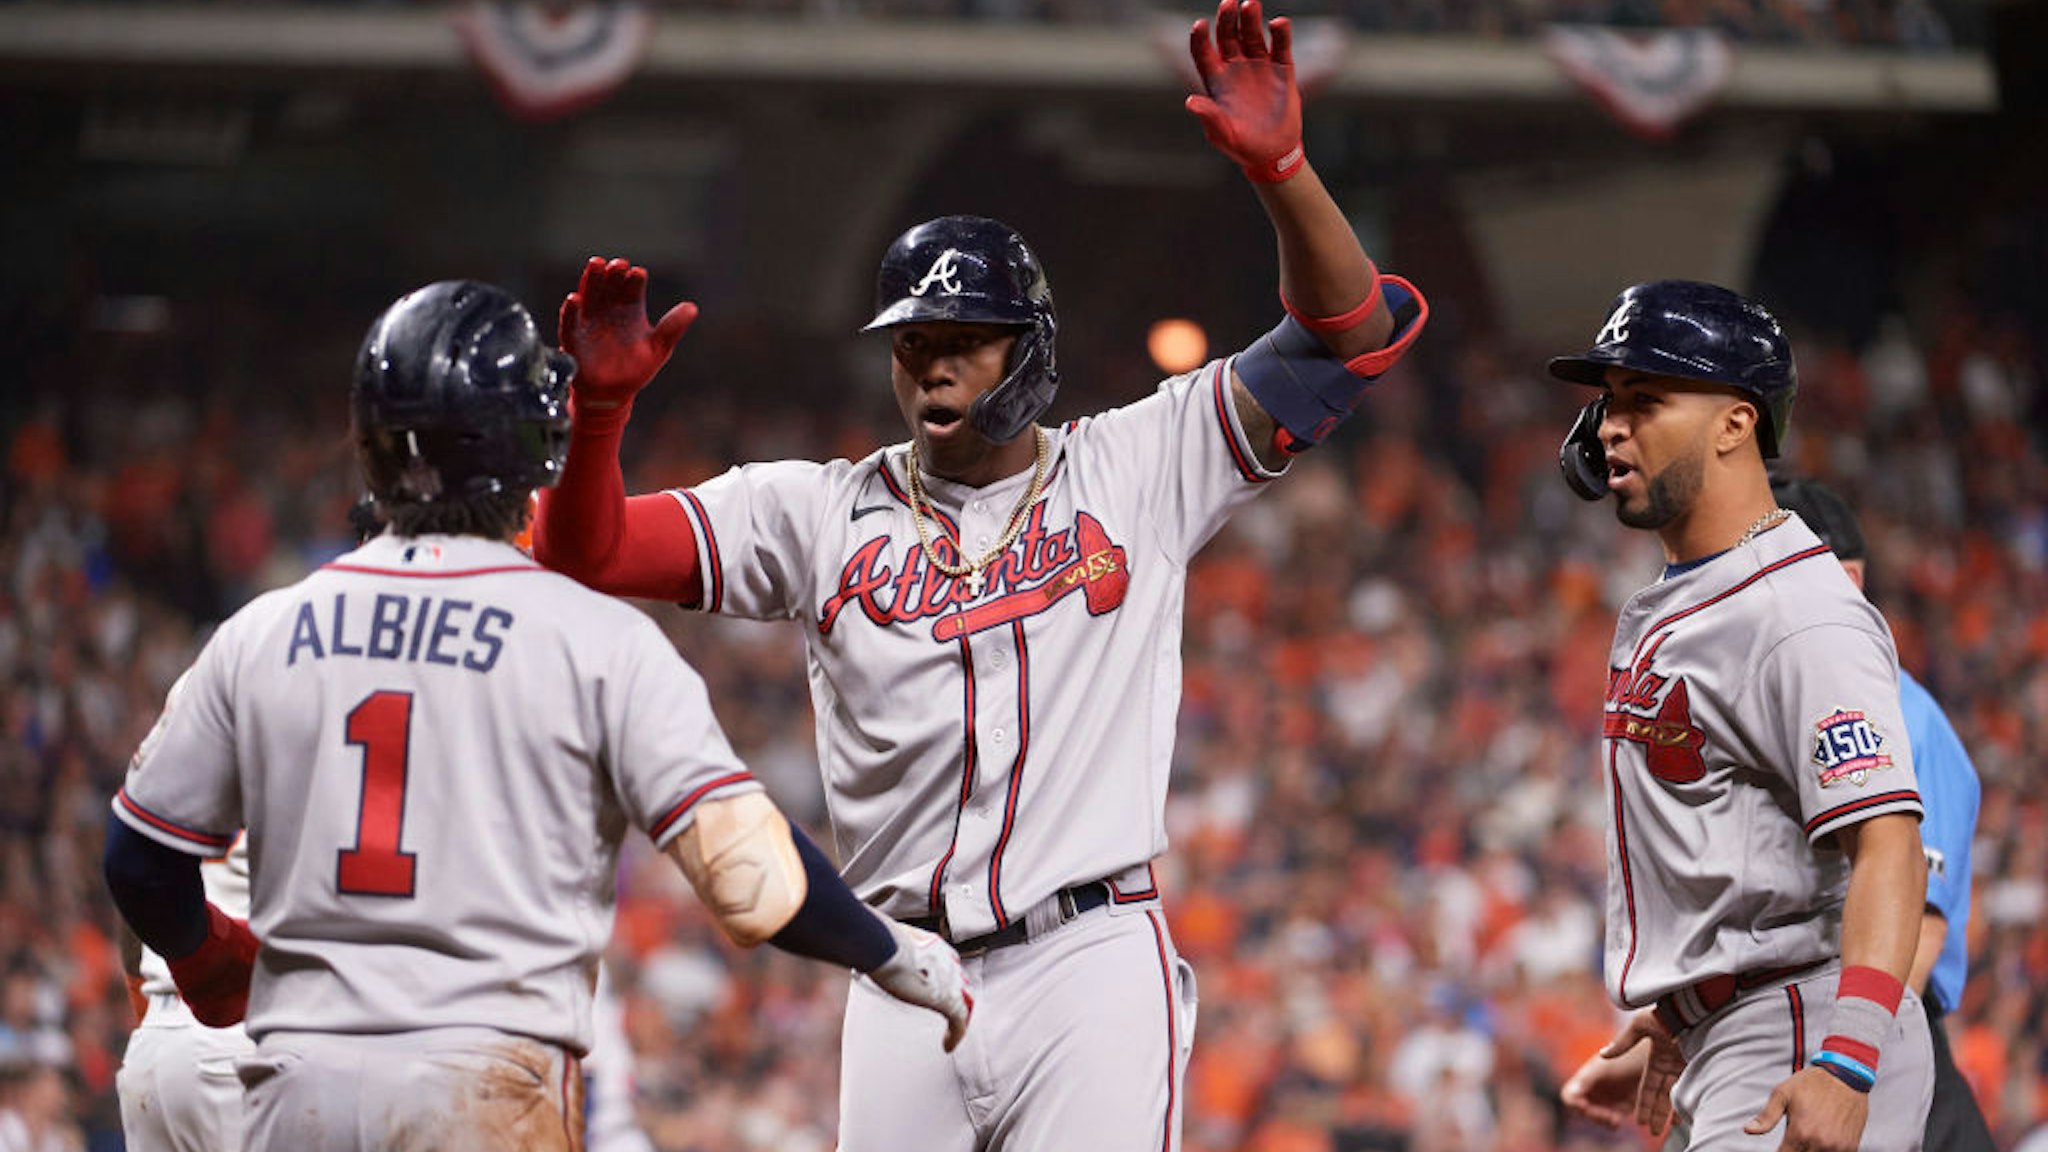 Baseball: World Series: Atlanta Braves Jorge Soler (12) victorious after hitting home run with Eddie Rosario (8) and Ozzie Albies (1) during game vs Houston Astros at Minute Maid Park. Game 6. Houston, TX 11/2/2021 CREDIT: Greg Nelson (Photo by Greg Nelson/Sports Illustrated via Getty Images) (Set Number: X163857 TK1)